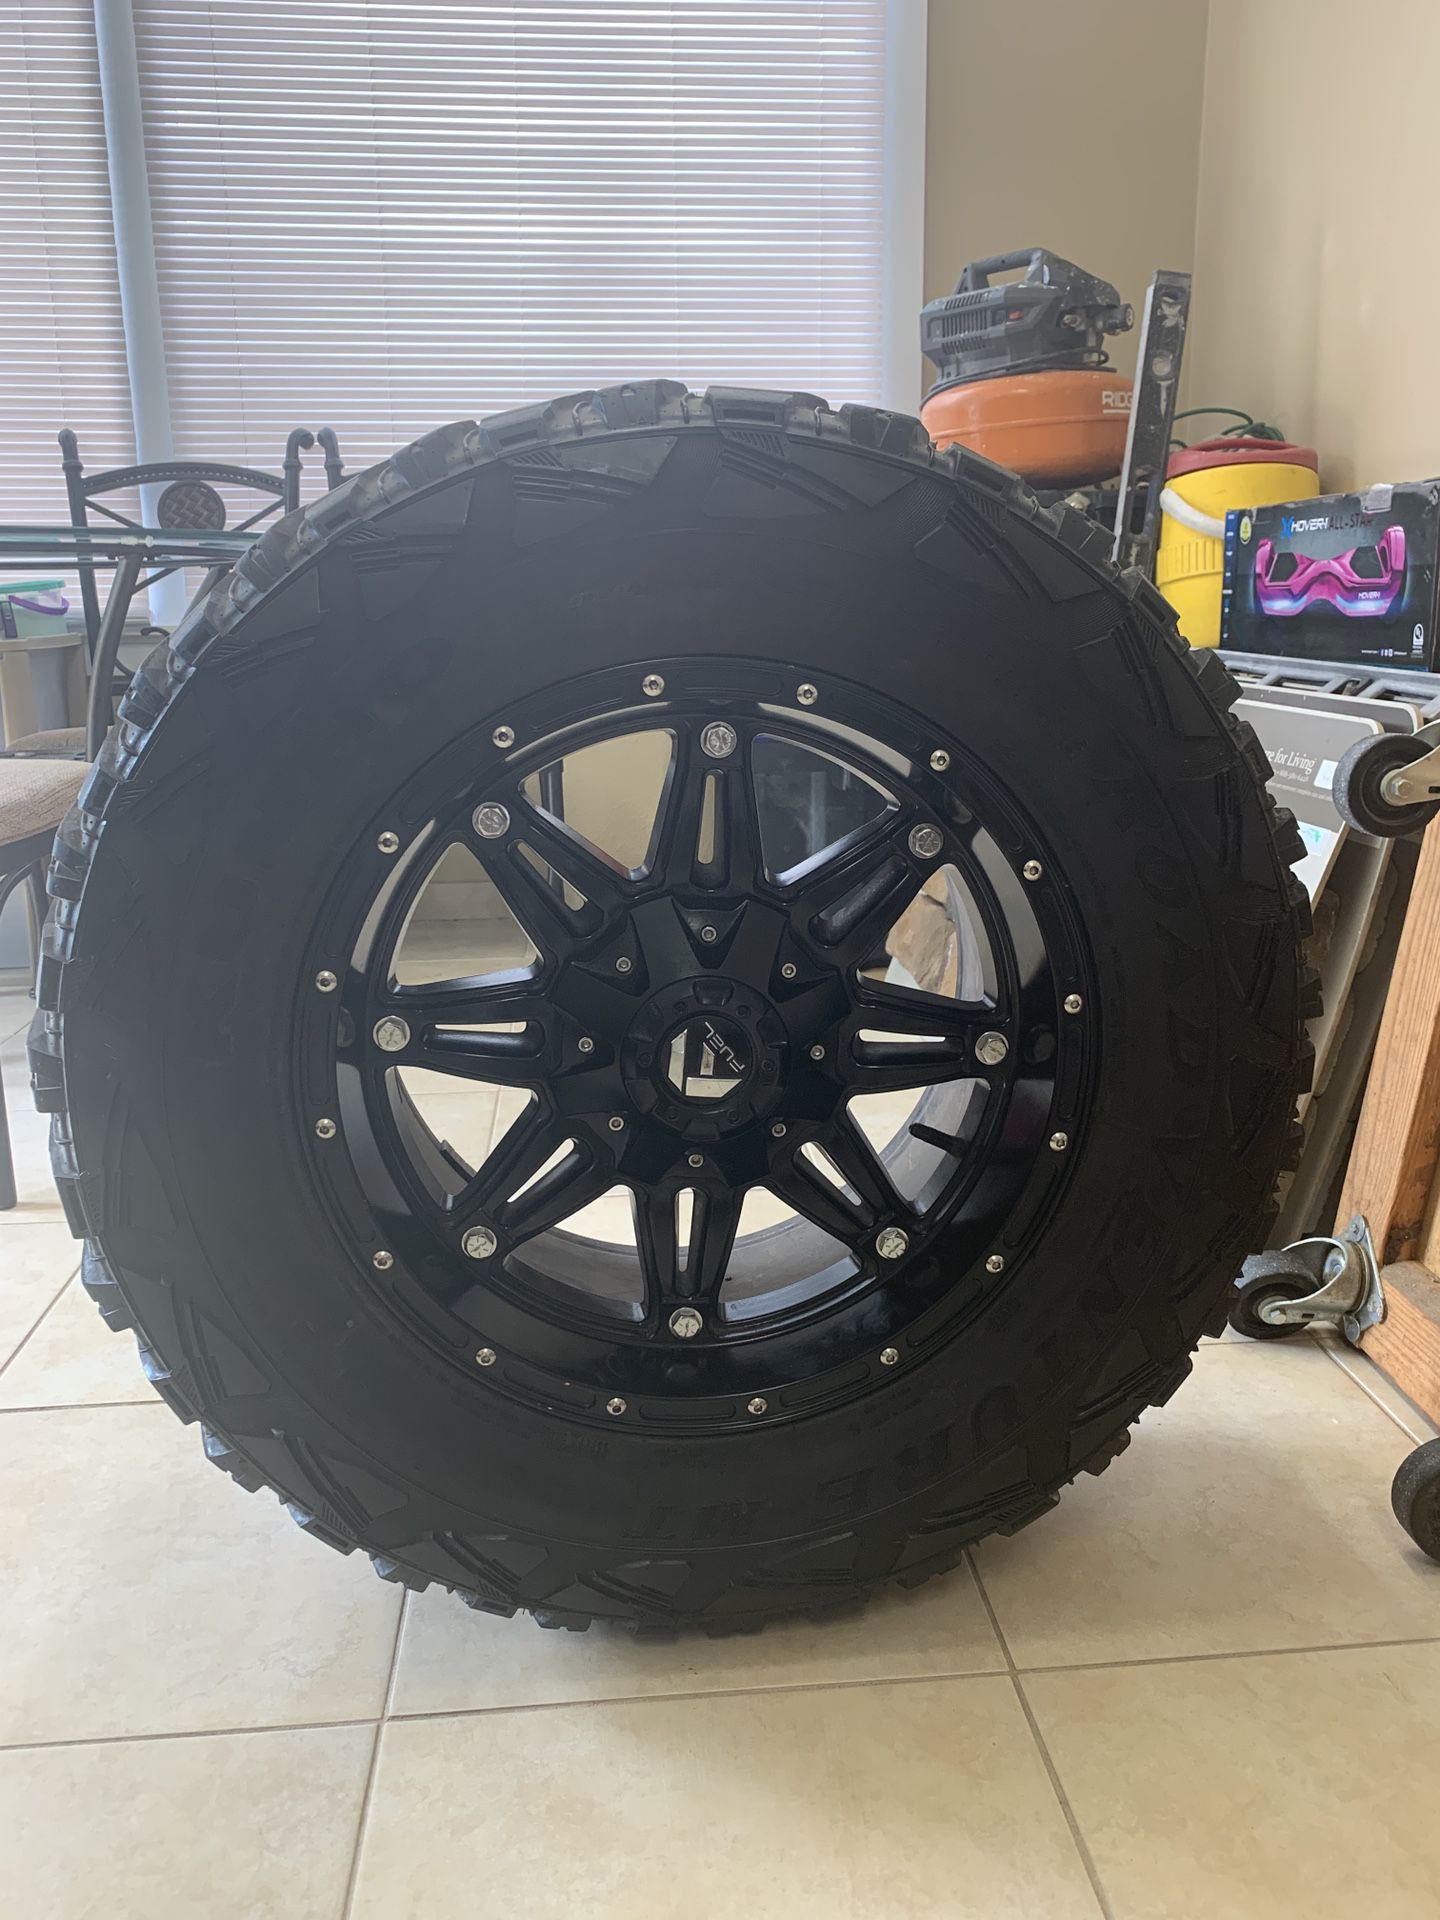 33/12.5/18 rims and tires